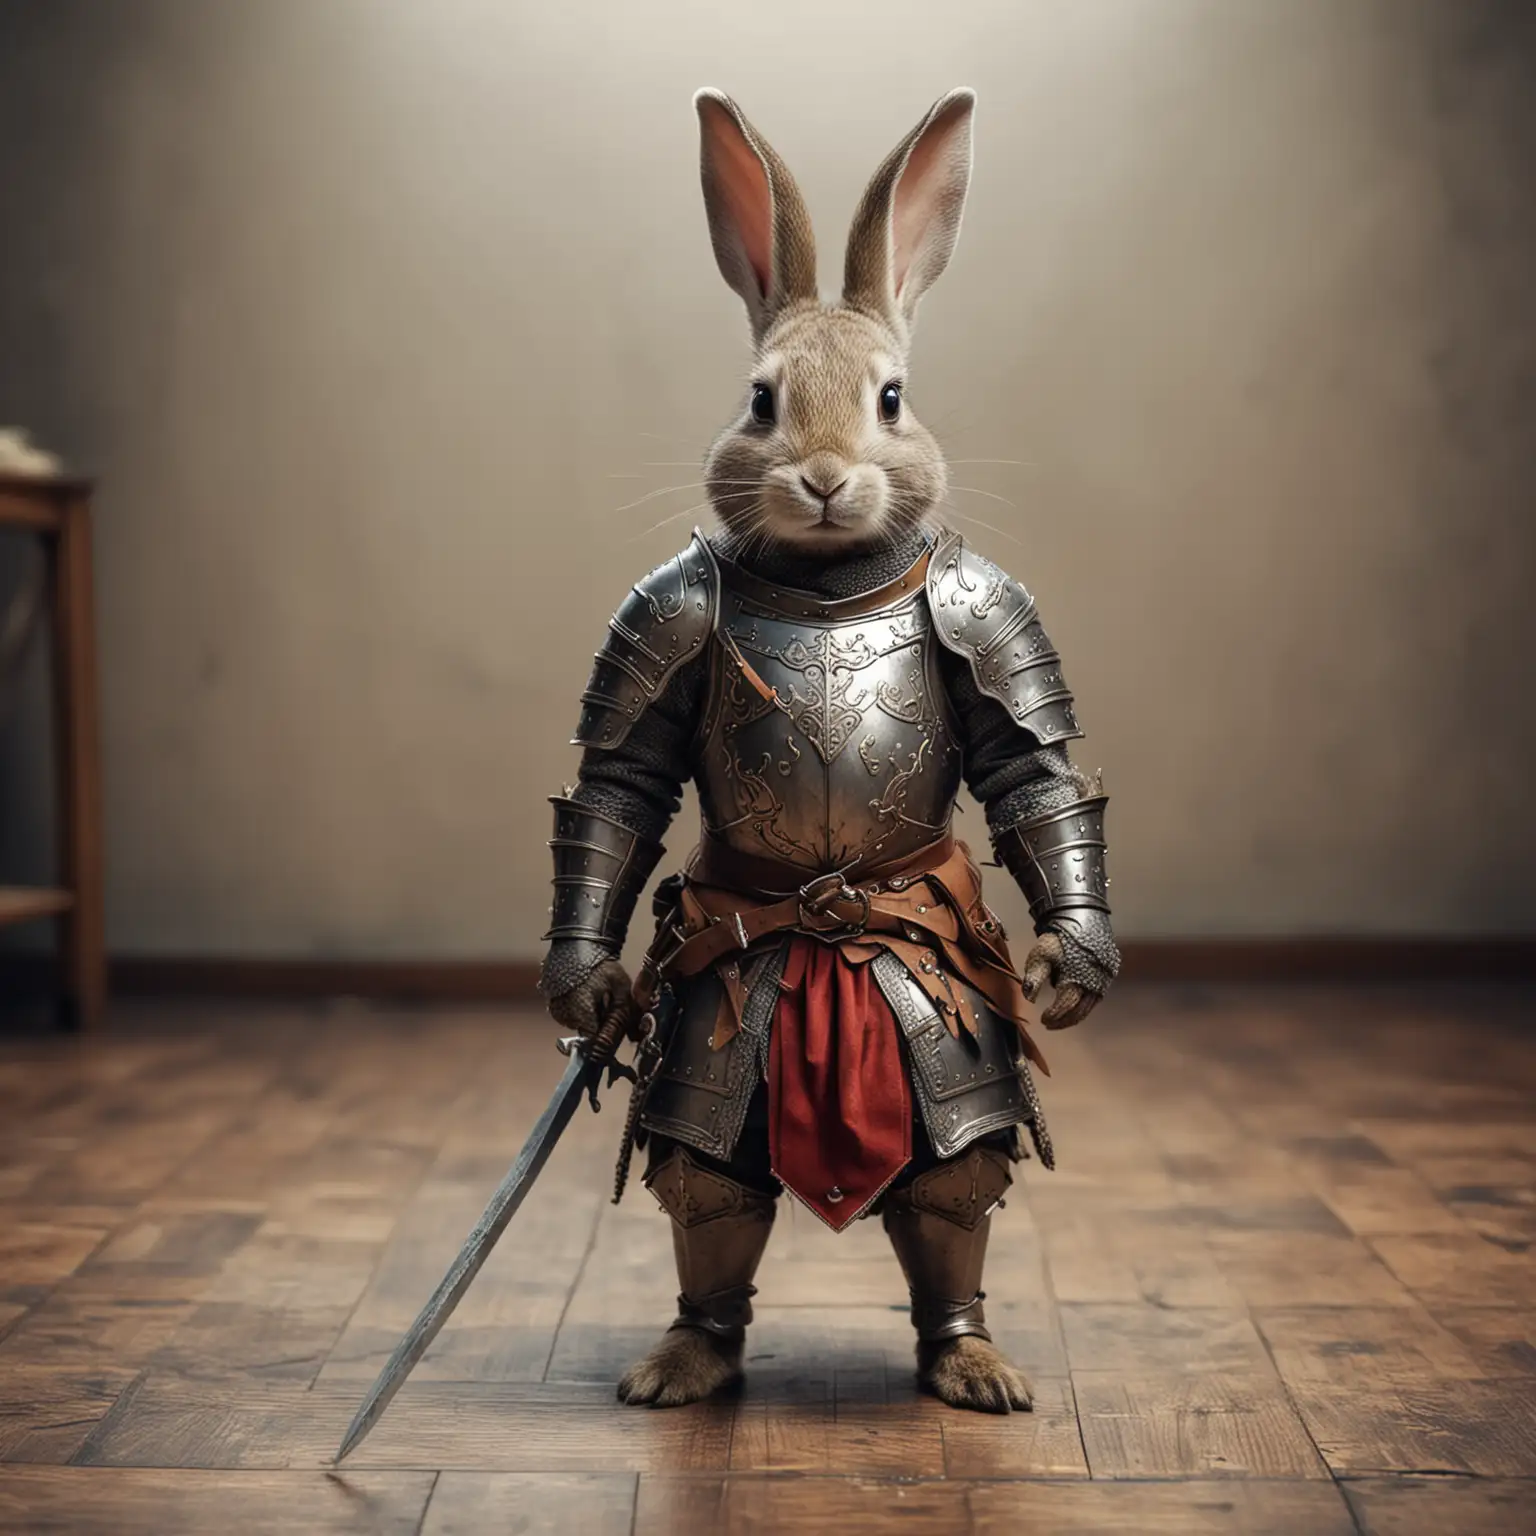 Medieval Rabbit Warrior Standing Proudly in Full Armor